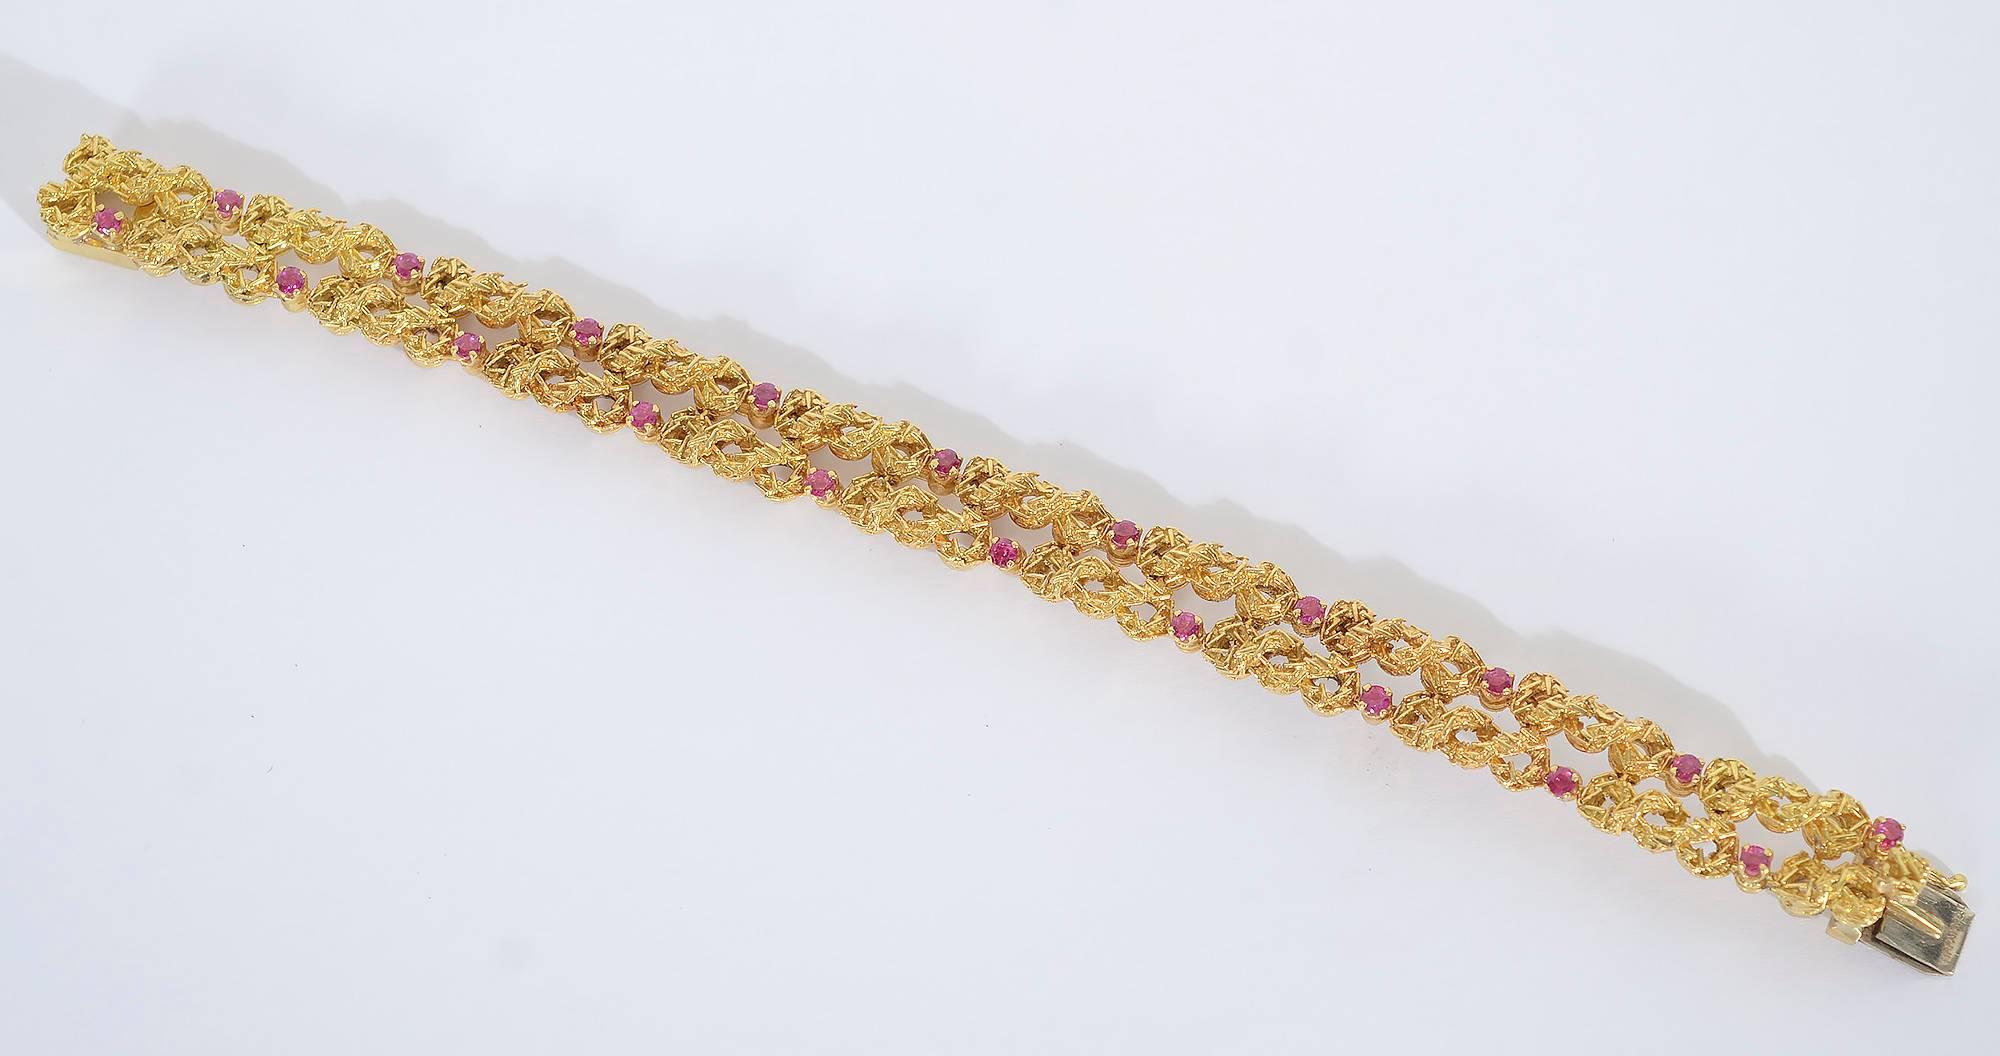 Interwoven loops of textured gold are interspersed with rubies in this refined, elegant Tiffany bracelet.
It measures 7 3/8